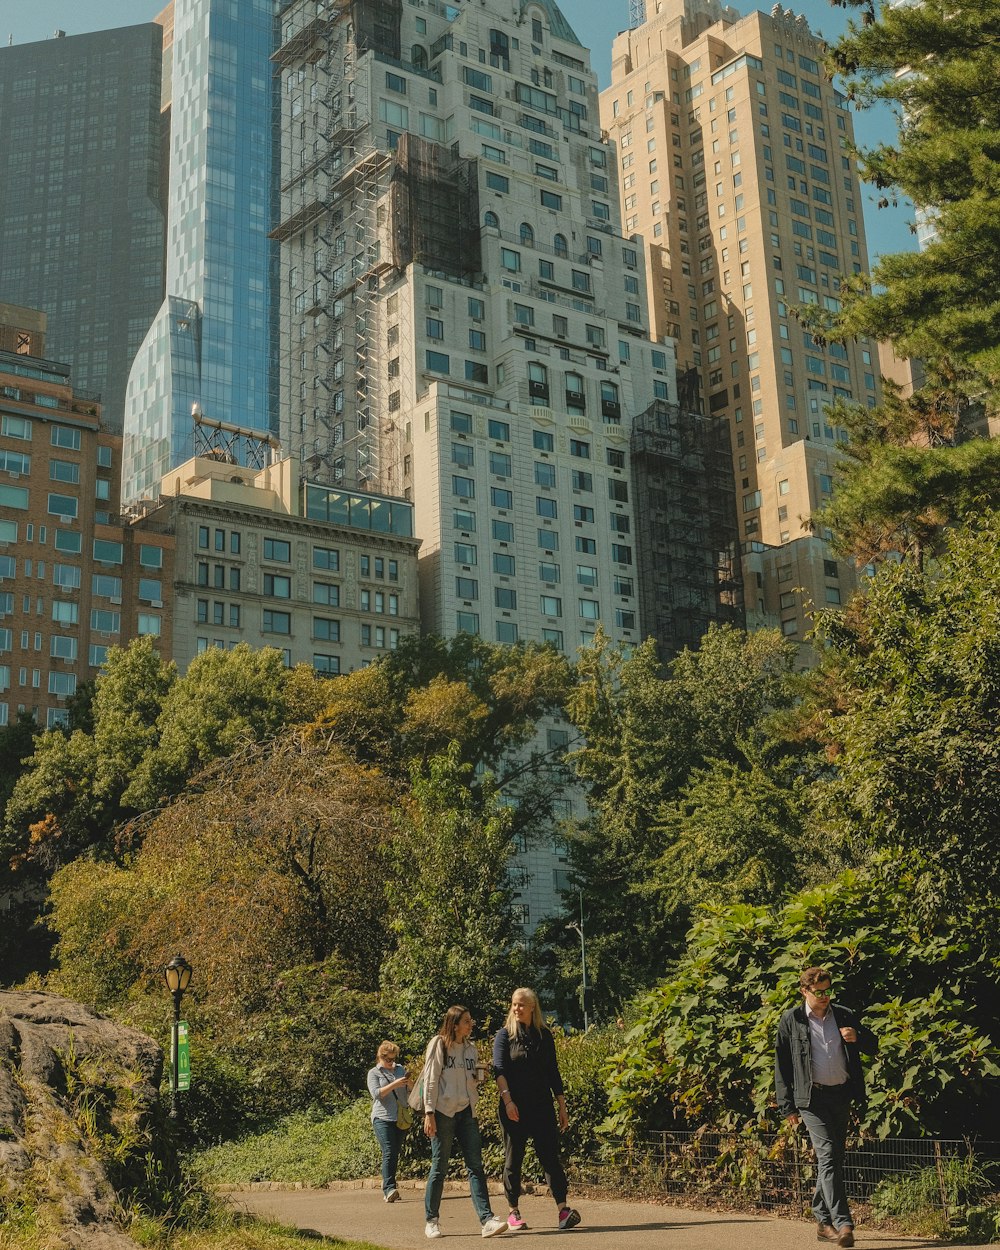 a group of people walking in a park with tall buildings in the background